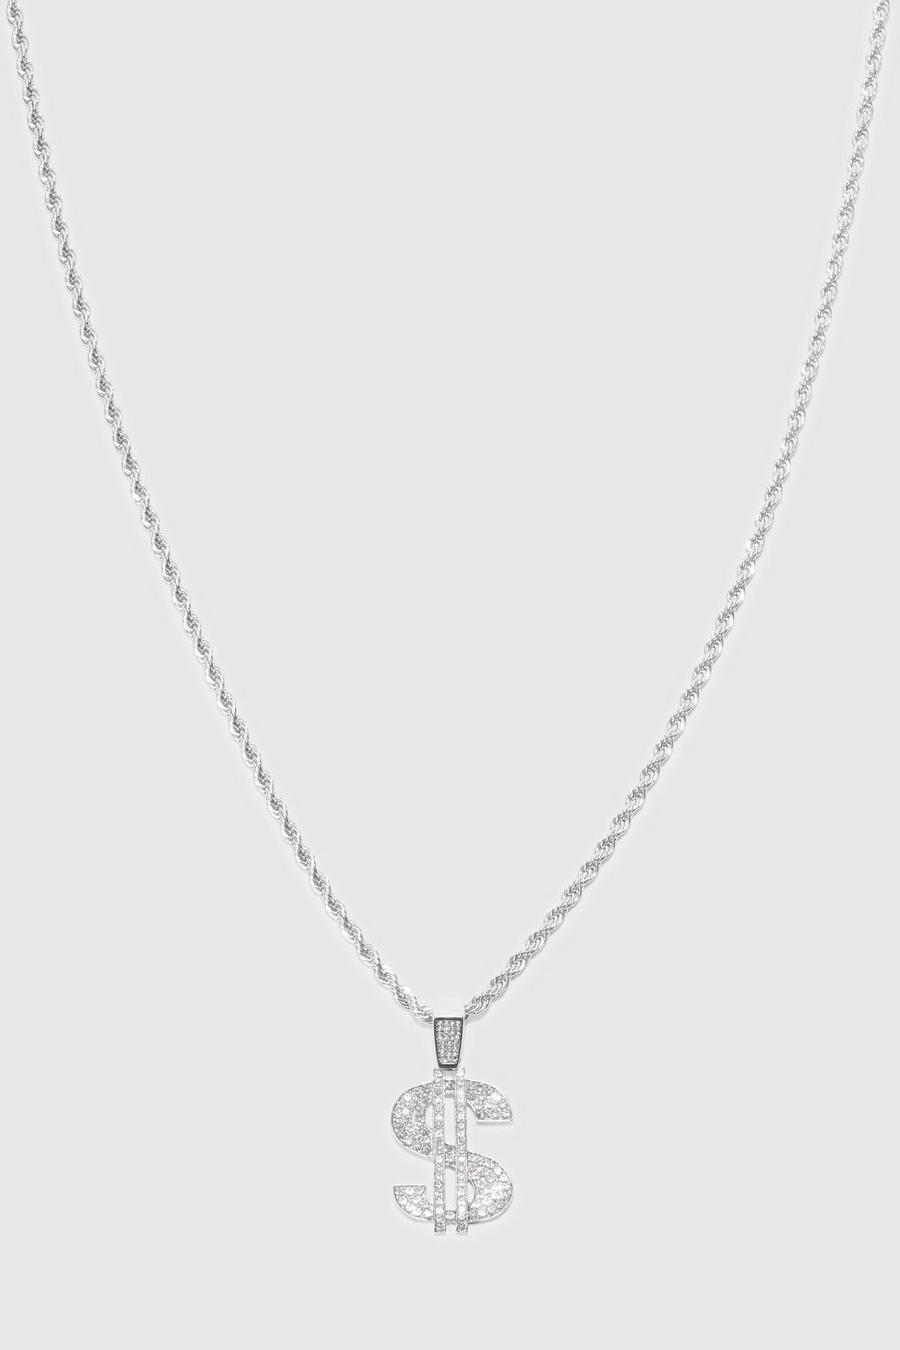 Silver Rope Chain Necklace With Iced Dollar